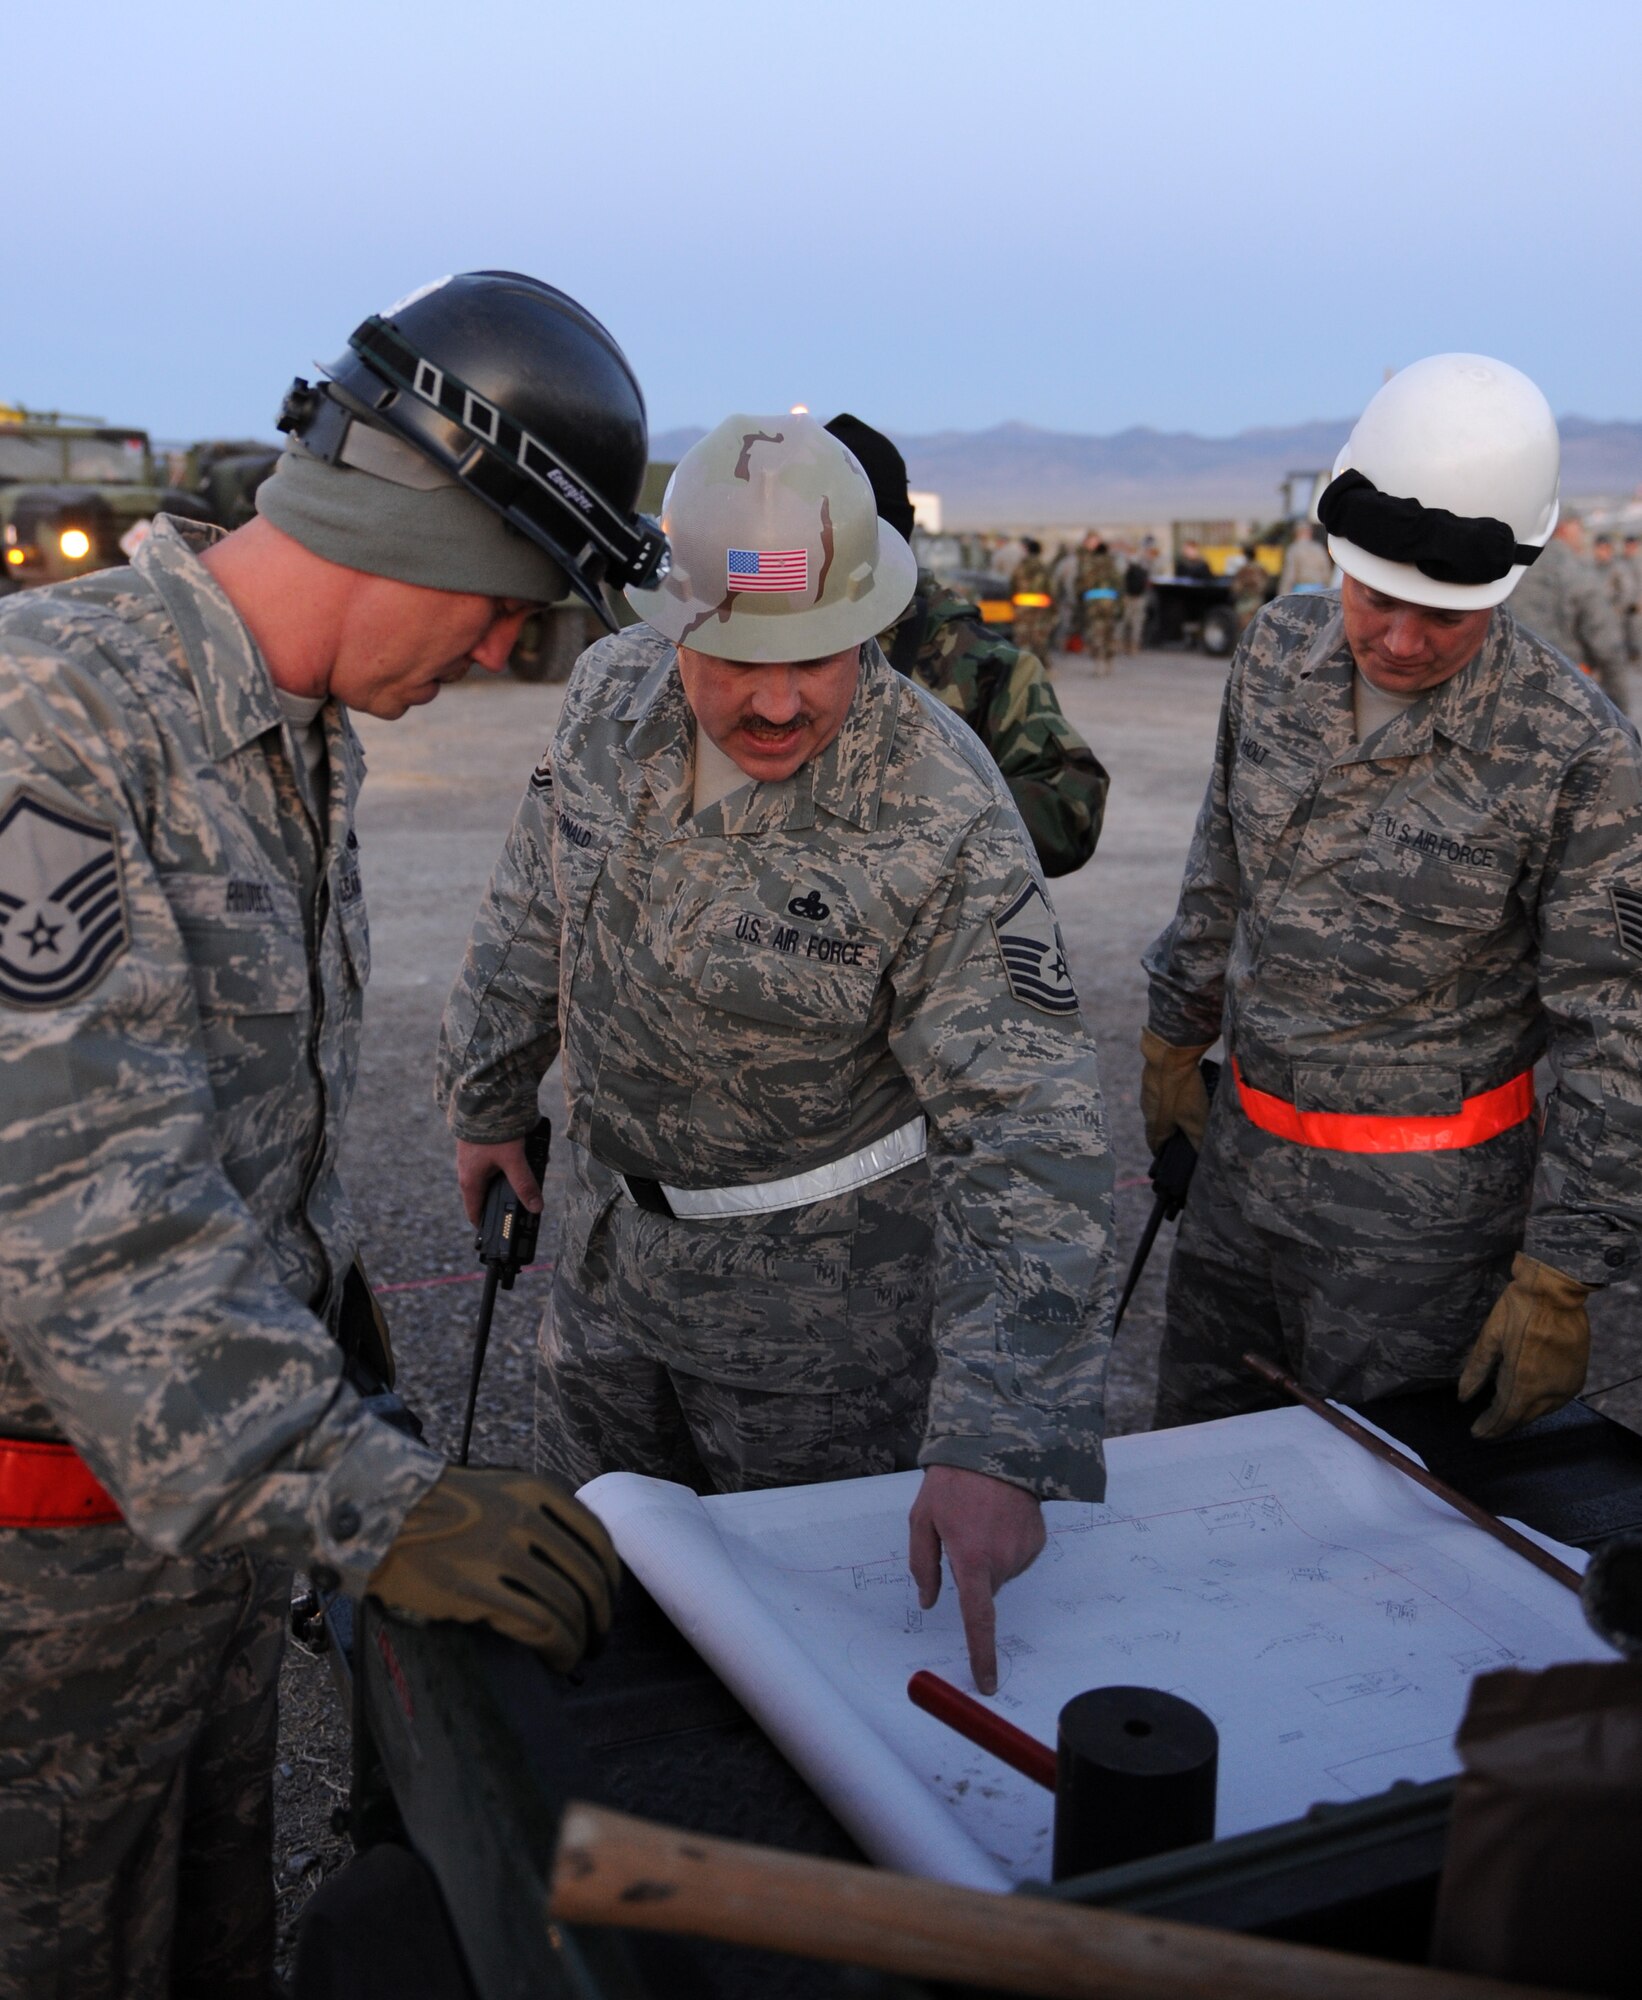 WENDOVER, Utah -- Master Sgt. James MacDonald (center), 726th Air Control Squadron beach master, discusses the layout for the training work site at Wendover, Utah, May 8 during a week-long training exercise. The 726th ACS tackles a wide-spread mission including enemy surveillance and identification, weapons control, joint and combined data-link connectivity, and battle management of offensive and defensive air activities. The squadron is made up of 27 different Air Force career fields, making it self-sustaining and able to deploy and fully operate without external support or help. (U.S. Air Force photo\Airman 1st Class Debbie Lockhart)